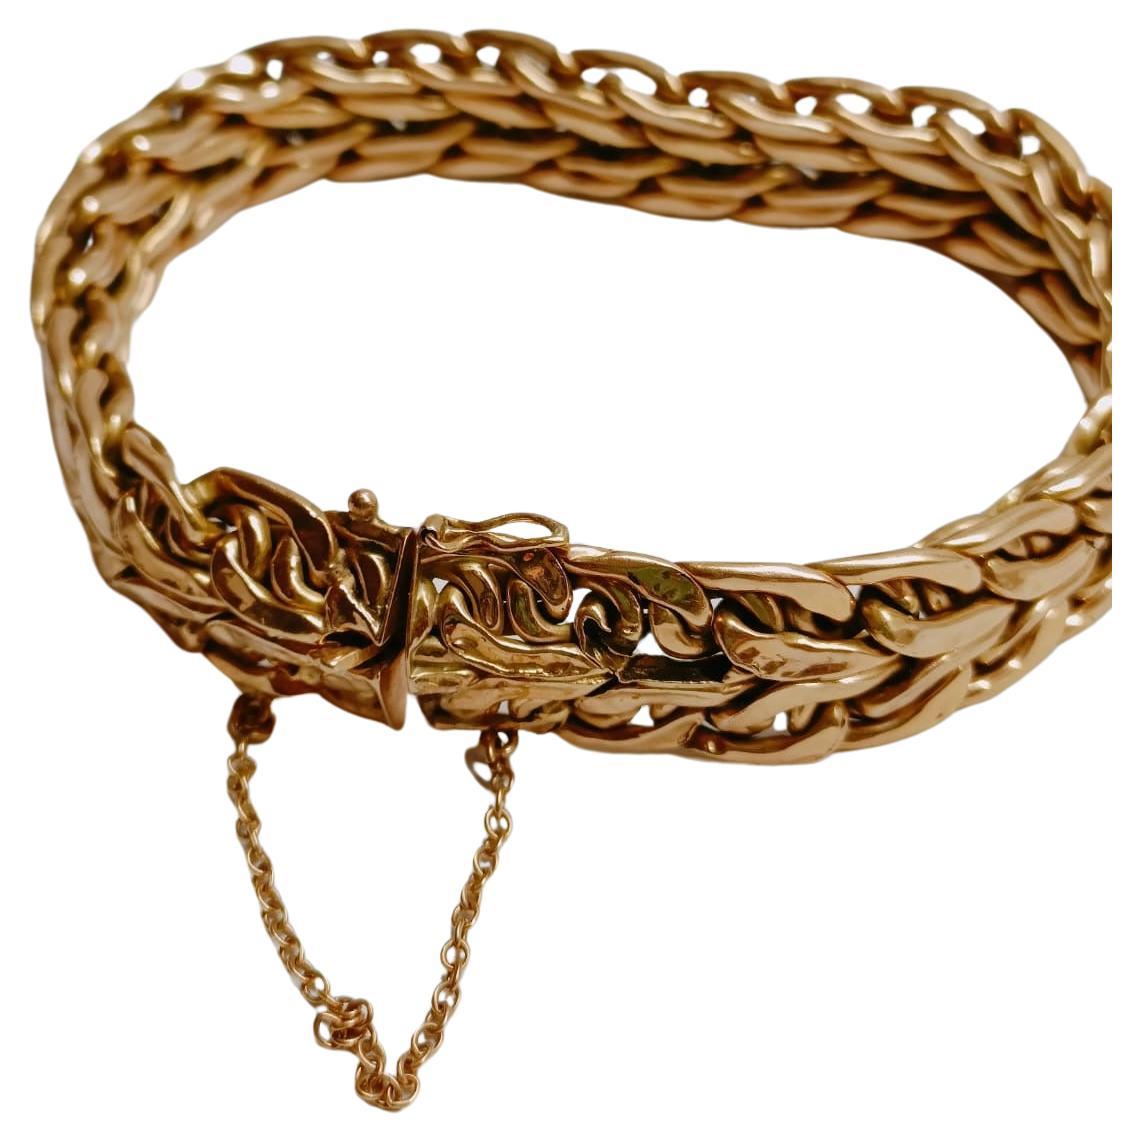 Vintage 18 Karat Yellow Gold Braided Bracelet.
Braided Wheat Link Yellow Gold French Bracelet.
Gold 18 Karat.
This classic vintage bracelet features an elegant braided link design crafted in 18k yellow gold. 
Made in France circa 1960s.